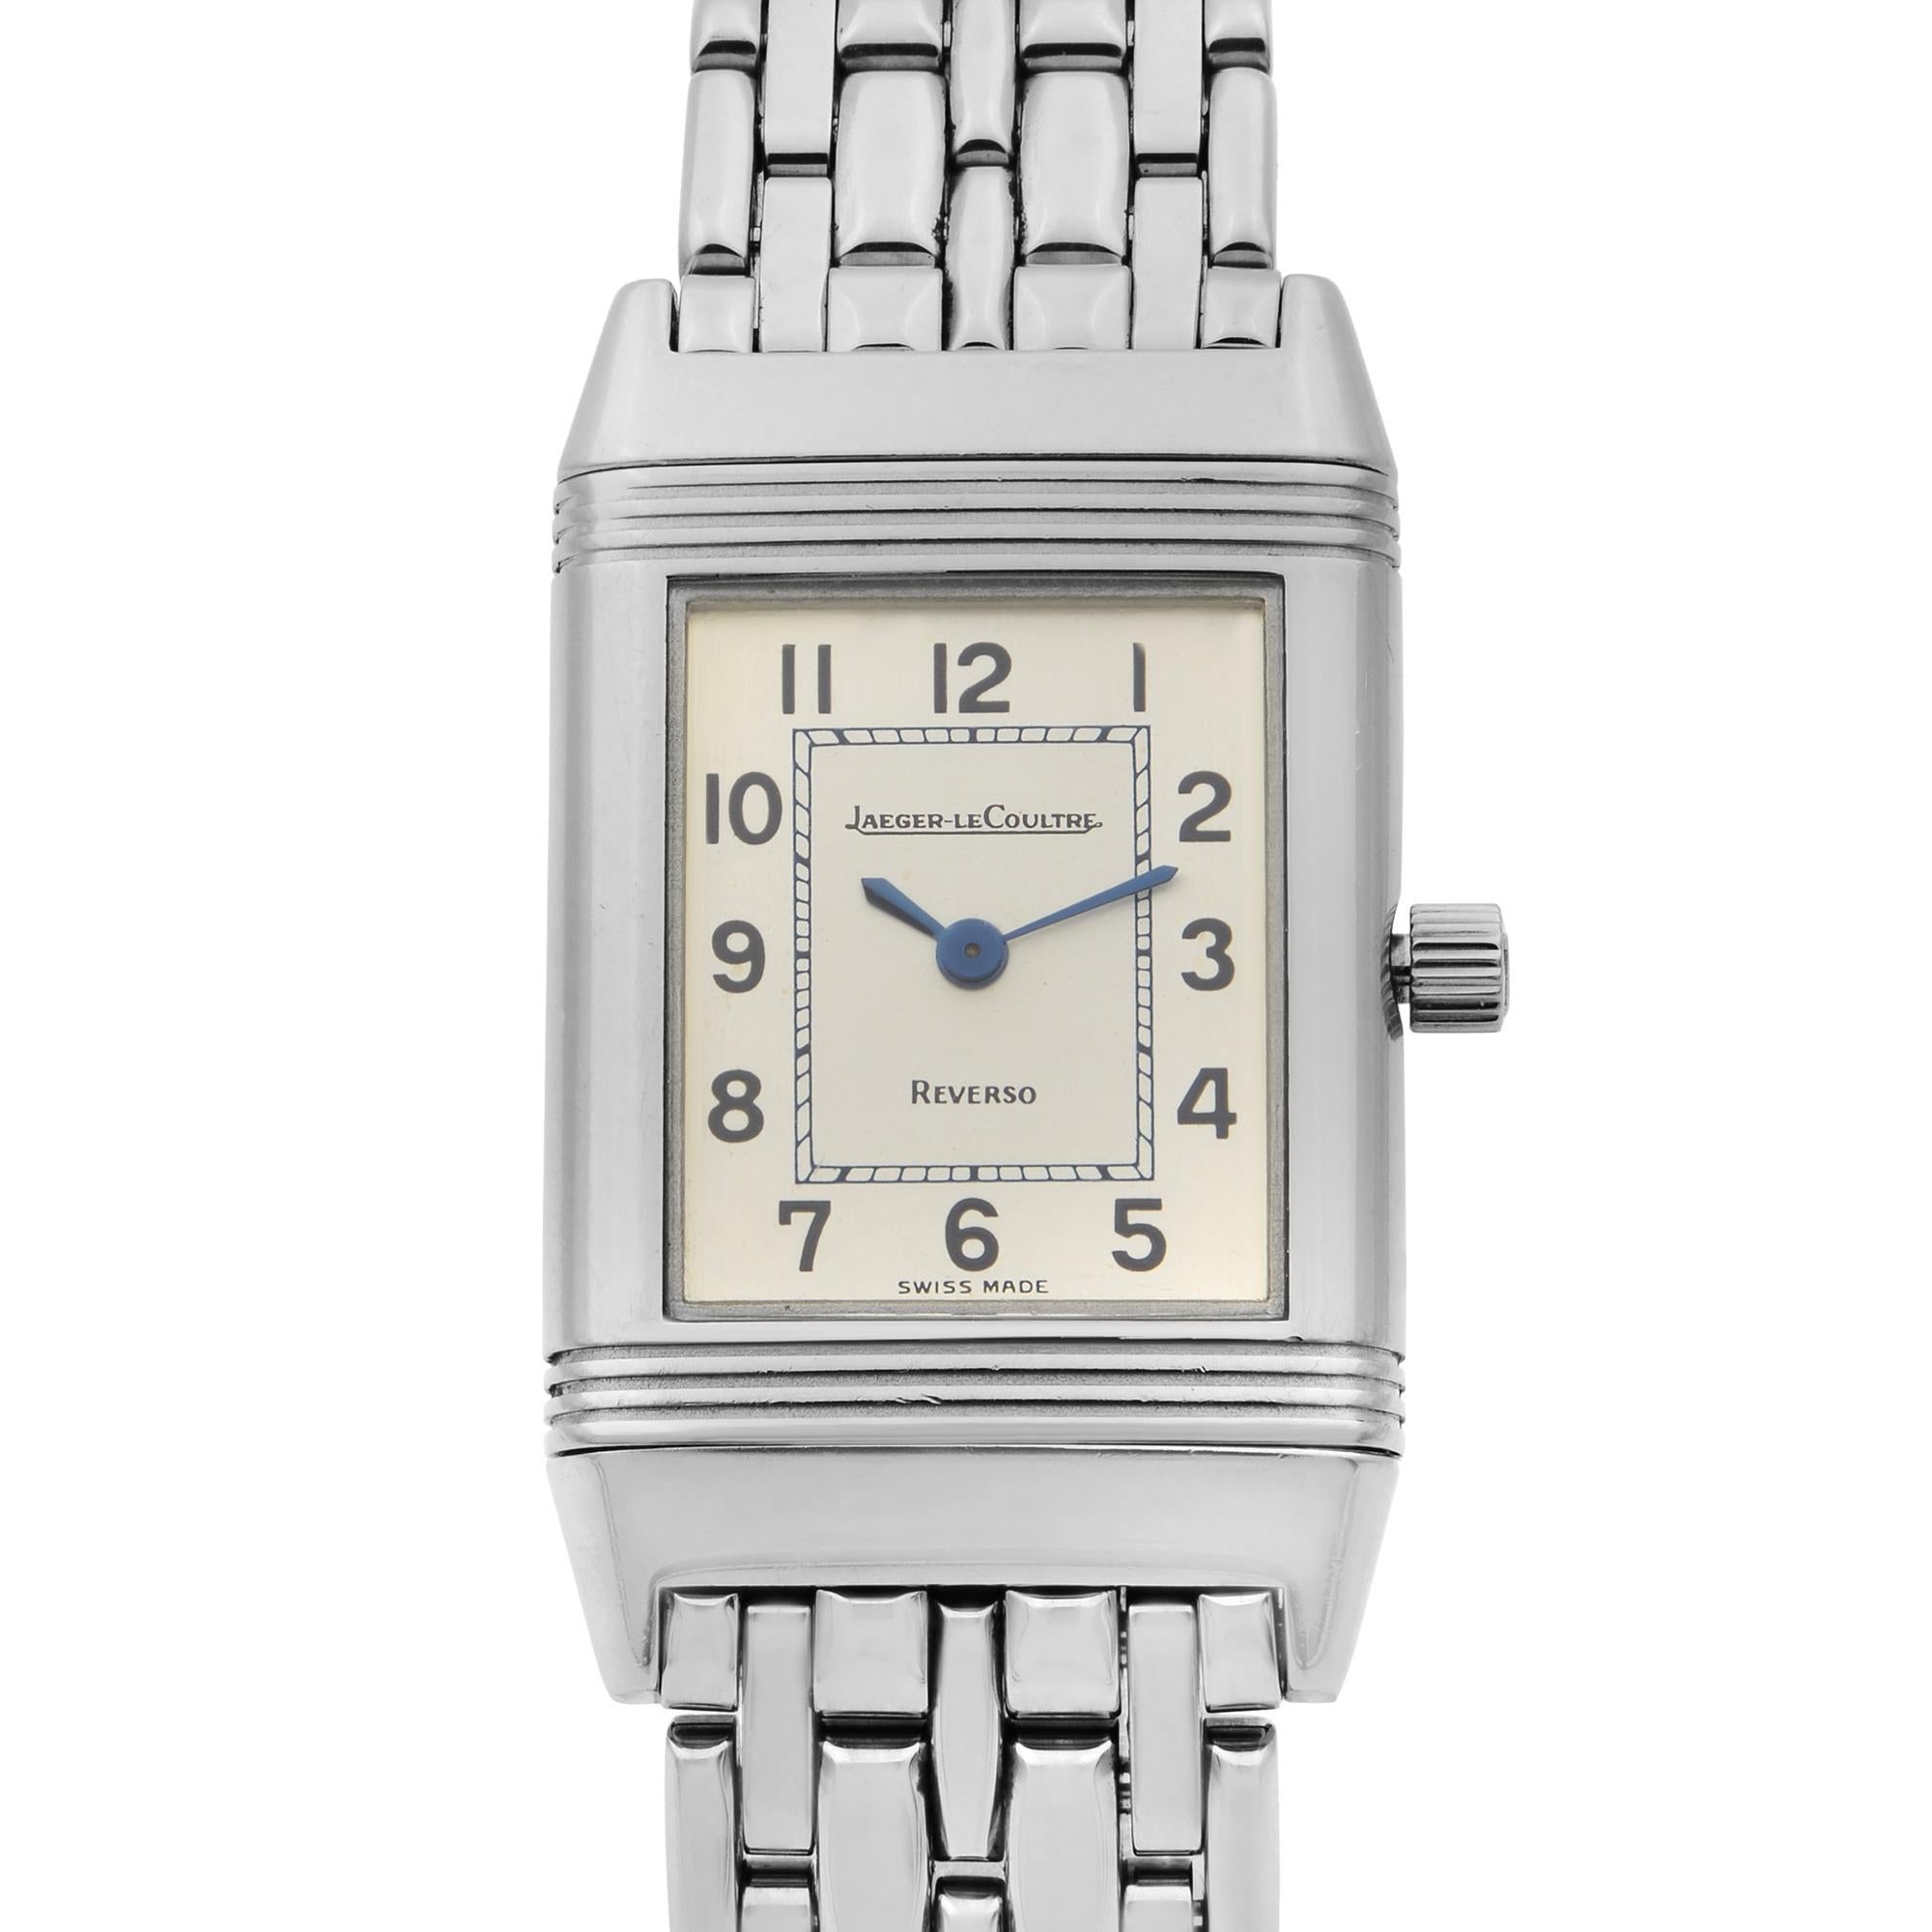 This pre-owned Jaeger-LeCoultre Reverso 260.8.08 is a beautiful men's timepiece that is powered by quartz (battery) movement which is cased in a stainless steel case. It has a round shape face, no features dial, and has hand arabic numerals style